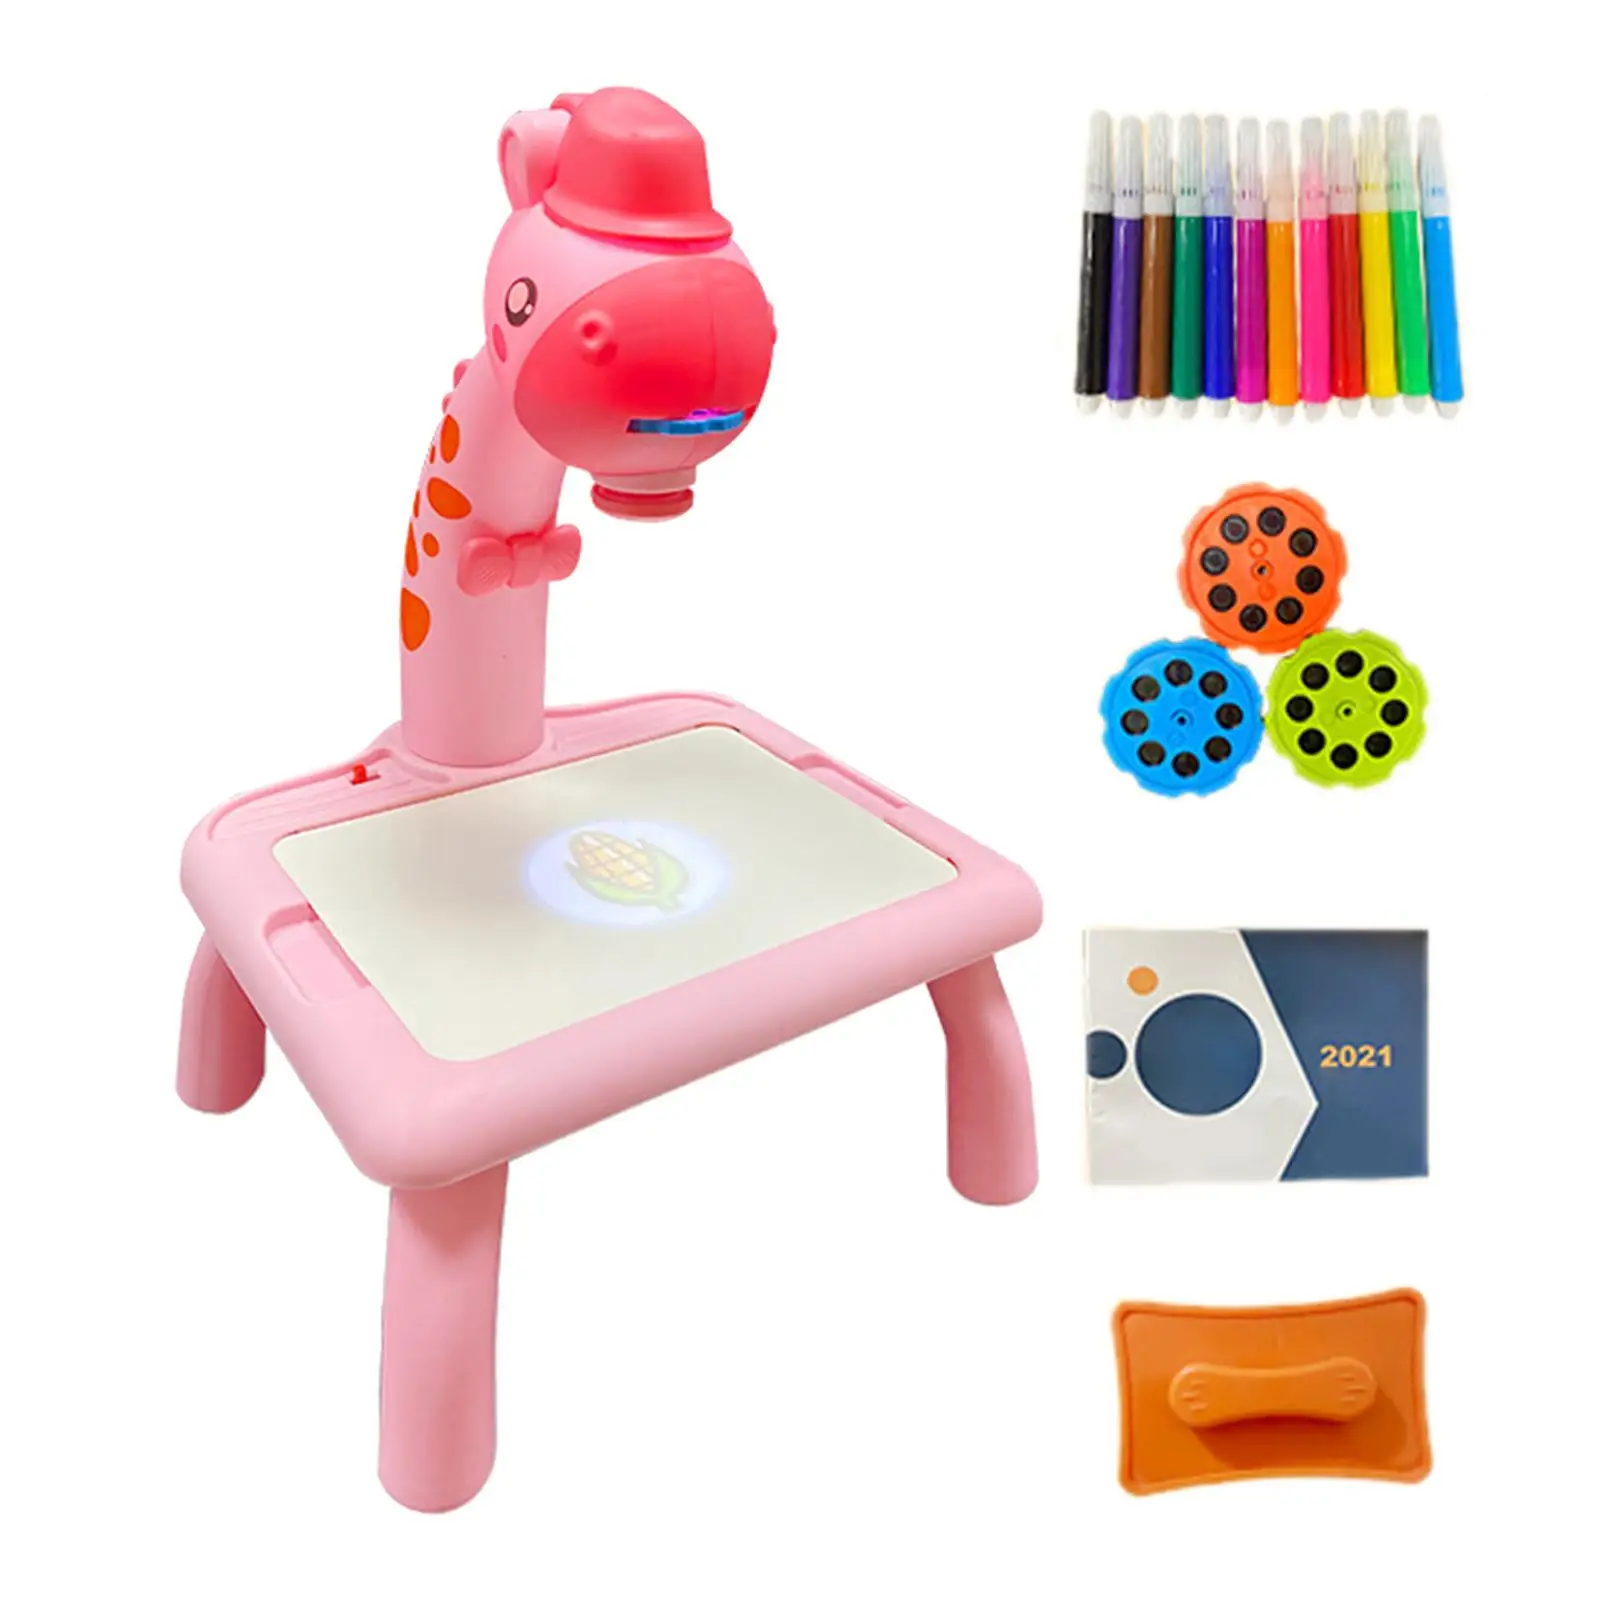 Projection Drawing Table Draw Projector Toy LED Projector Art Table Projection Drawing Board for Ages 3+